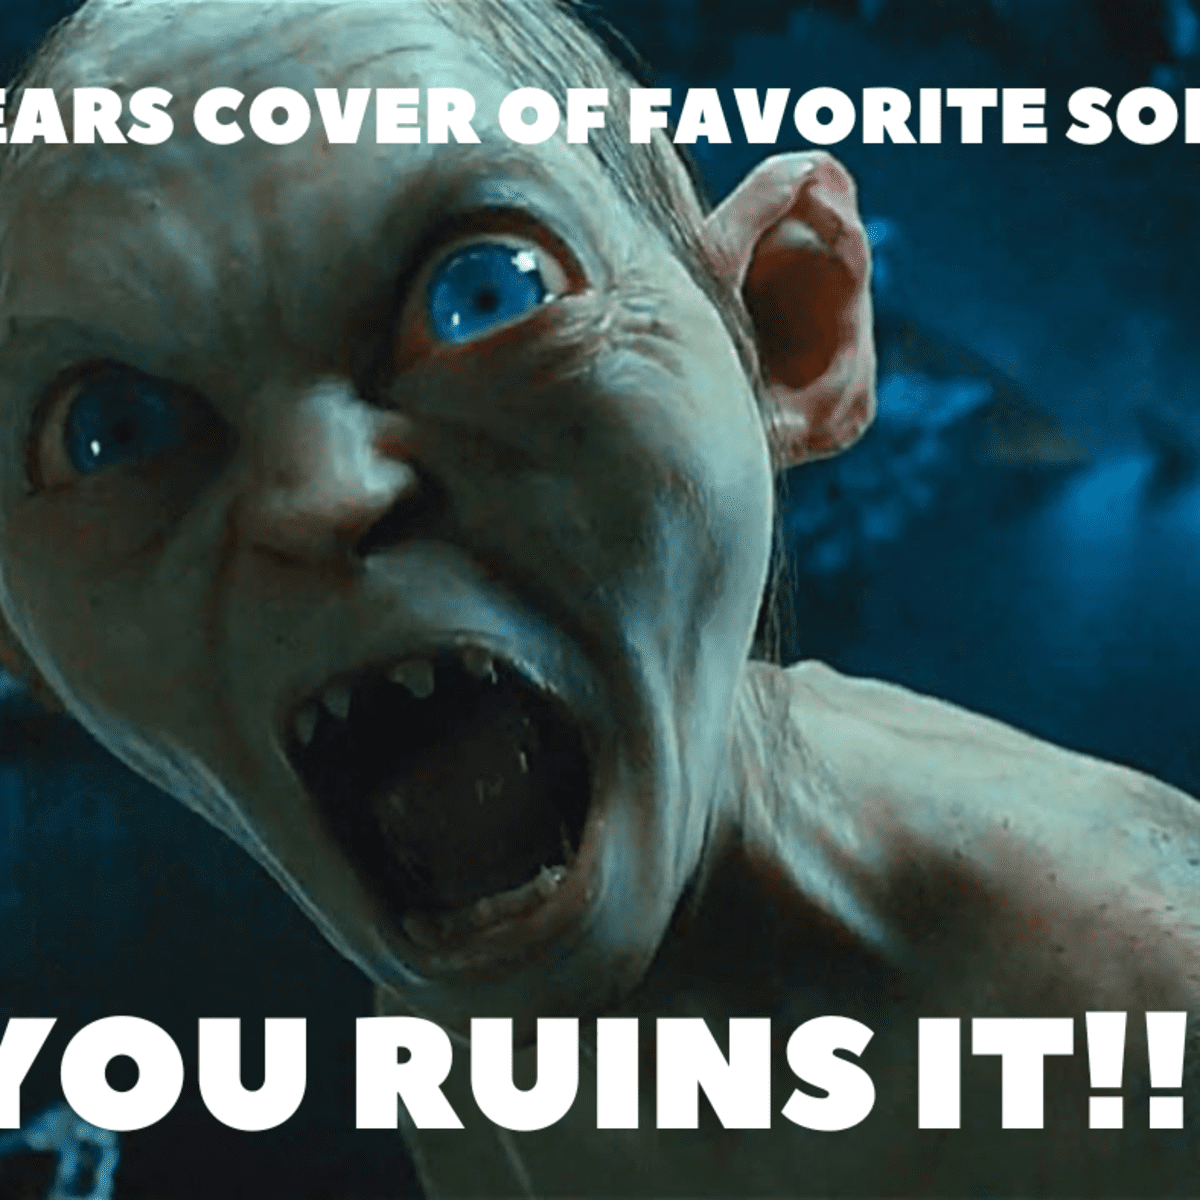 30 Meme Songs That Will Tickle Your Bones - HubPages